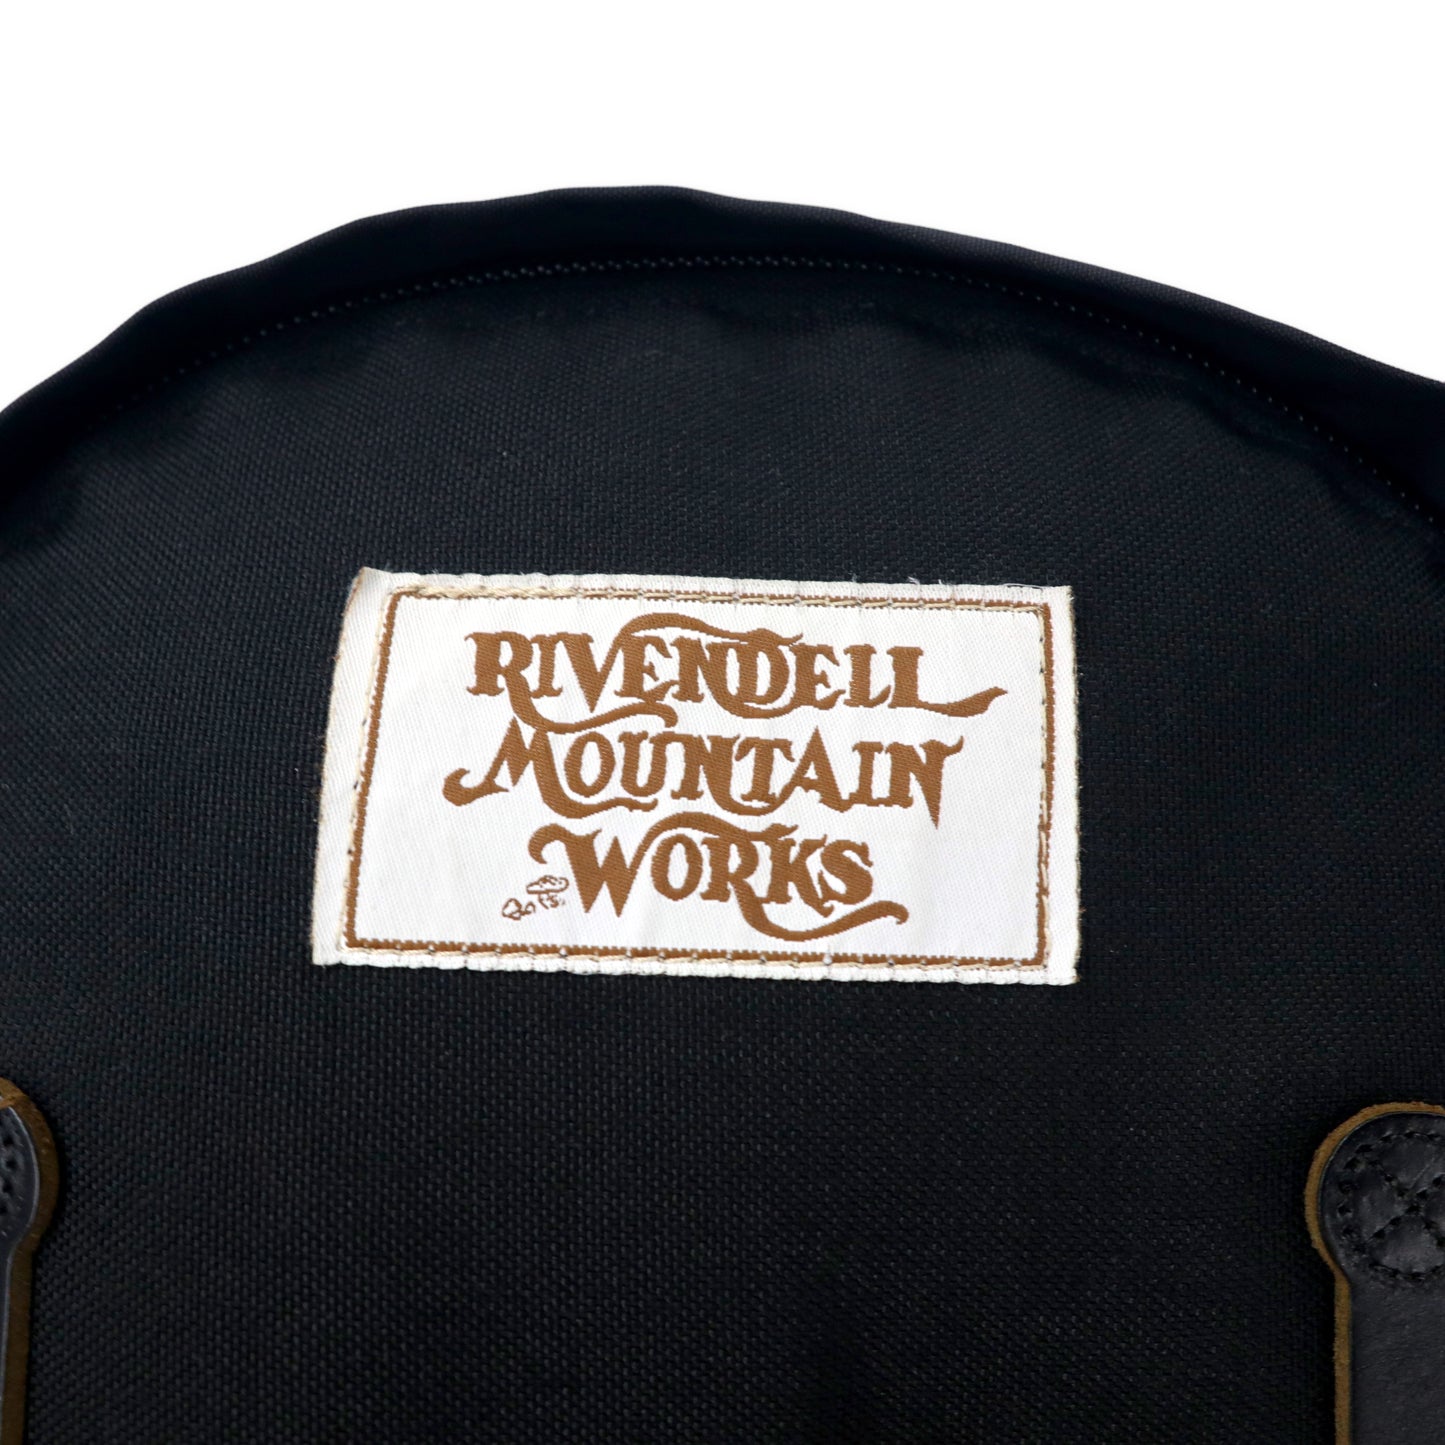 RIVENDELL MOUNTAIN WORKS USA製 バックパック リュックサック ブラック ナイロン